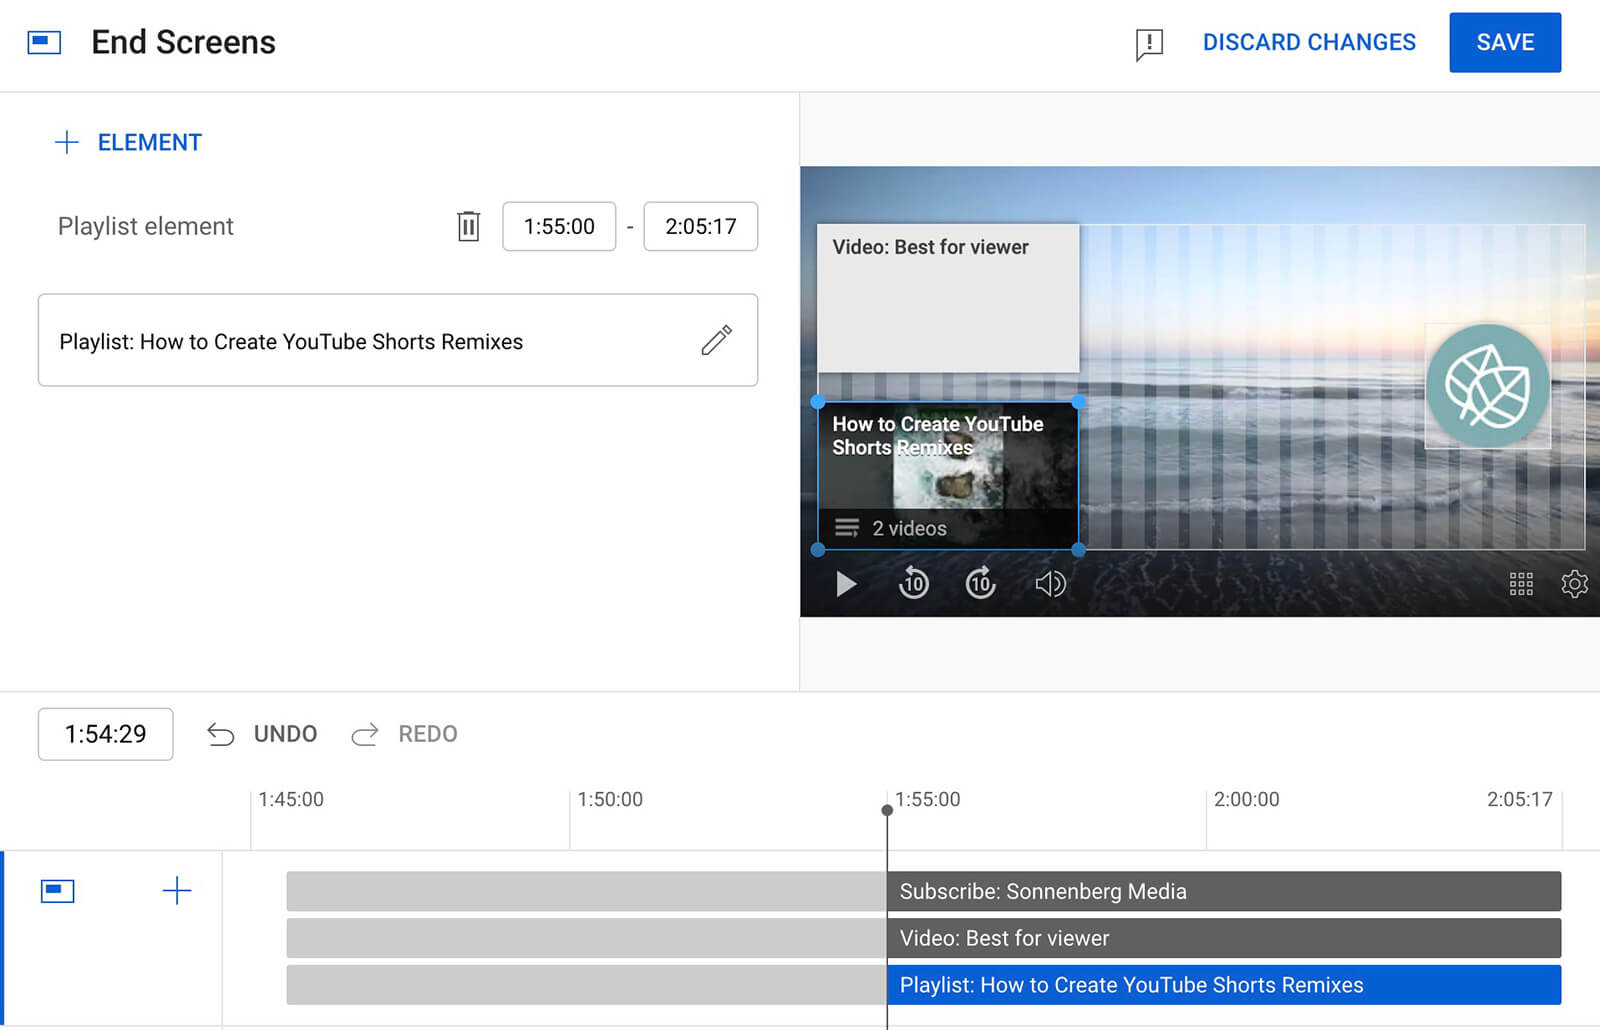 more-video-views-with-youtube-playlists-utilize-end-screens-15